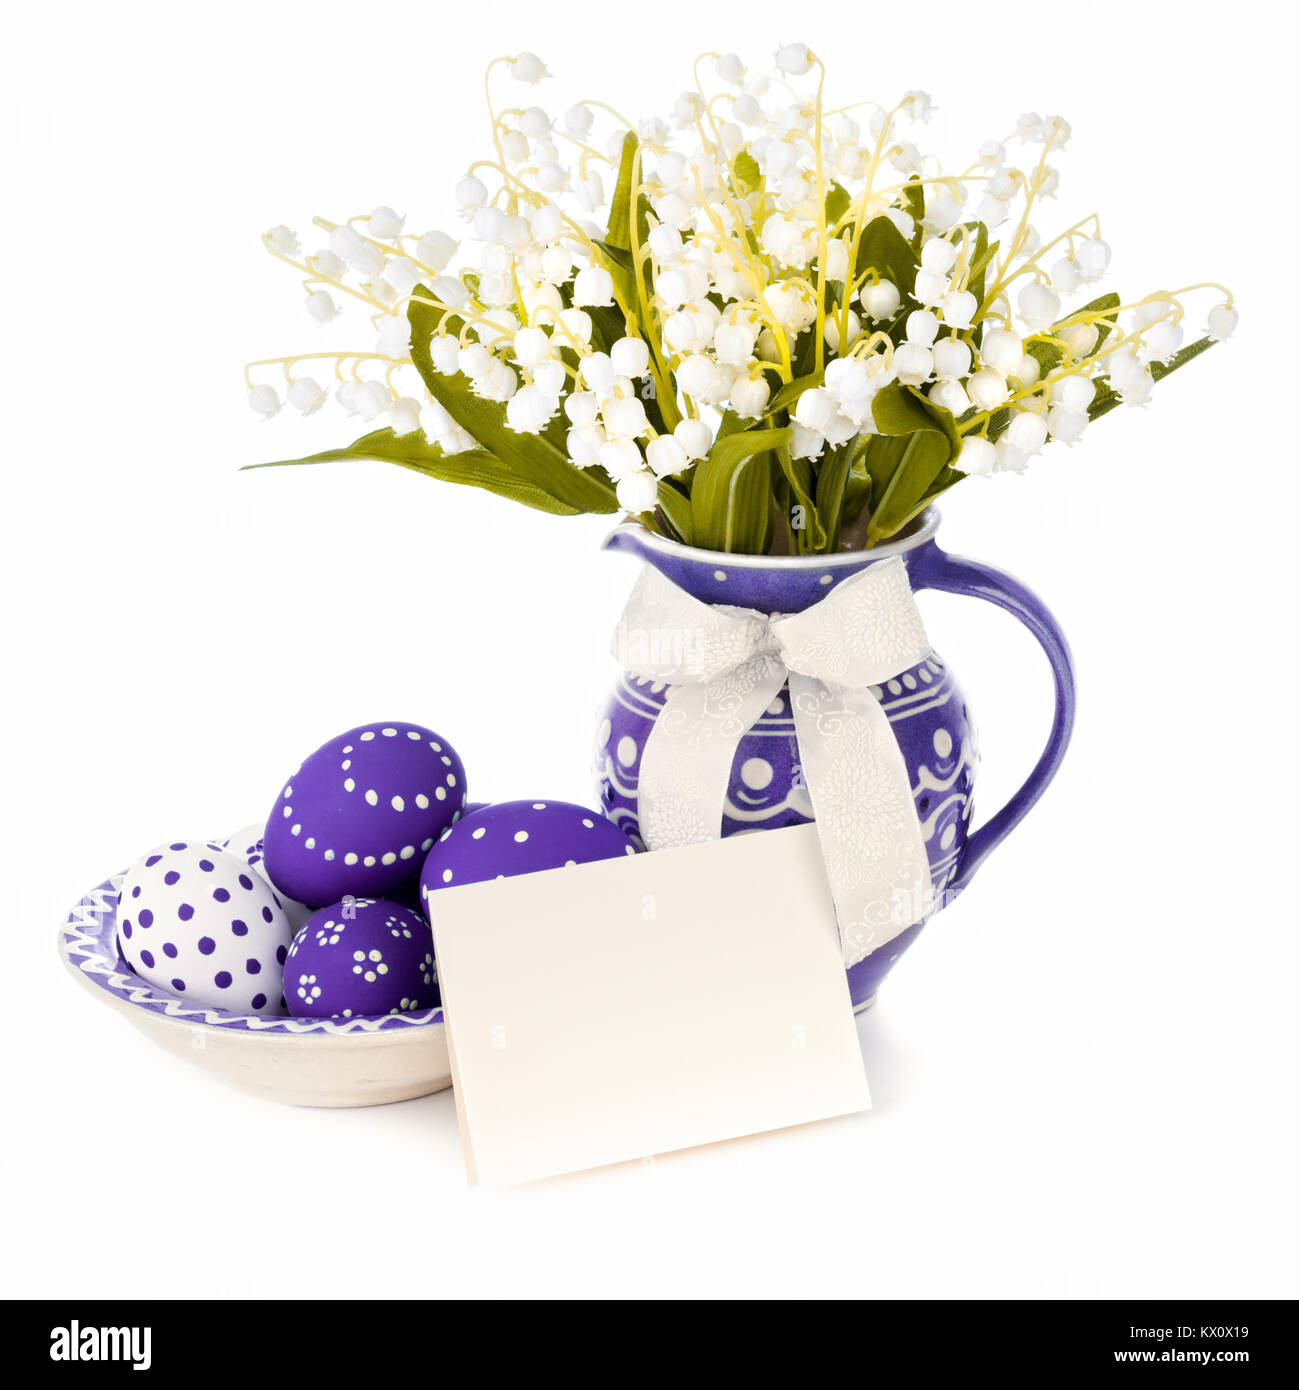 Easter eggs and artificial lily of the valley flowers in ceramic vase, isolated on white. Focus on the eggs. Space for your greeting on the blank card Stock Photo